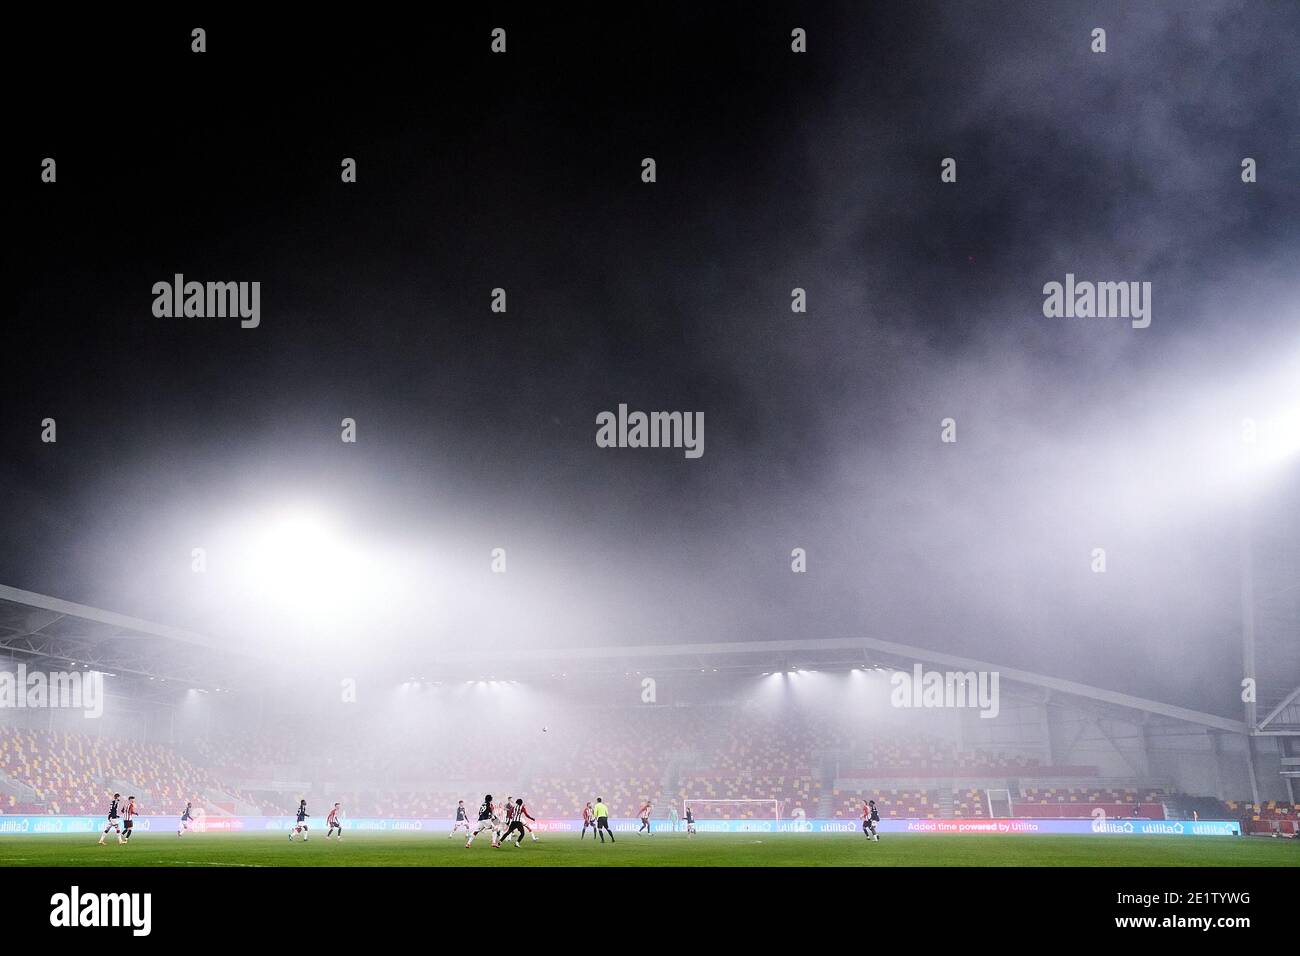 General view of the action between Brentford and Middlesbrough in foggy conditions, during the Emirates FA Cup third round match at the Brentford Community Stadium, London. Stock Photo